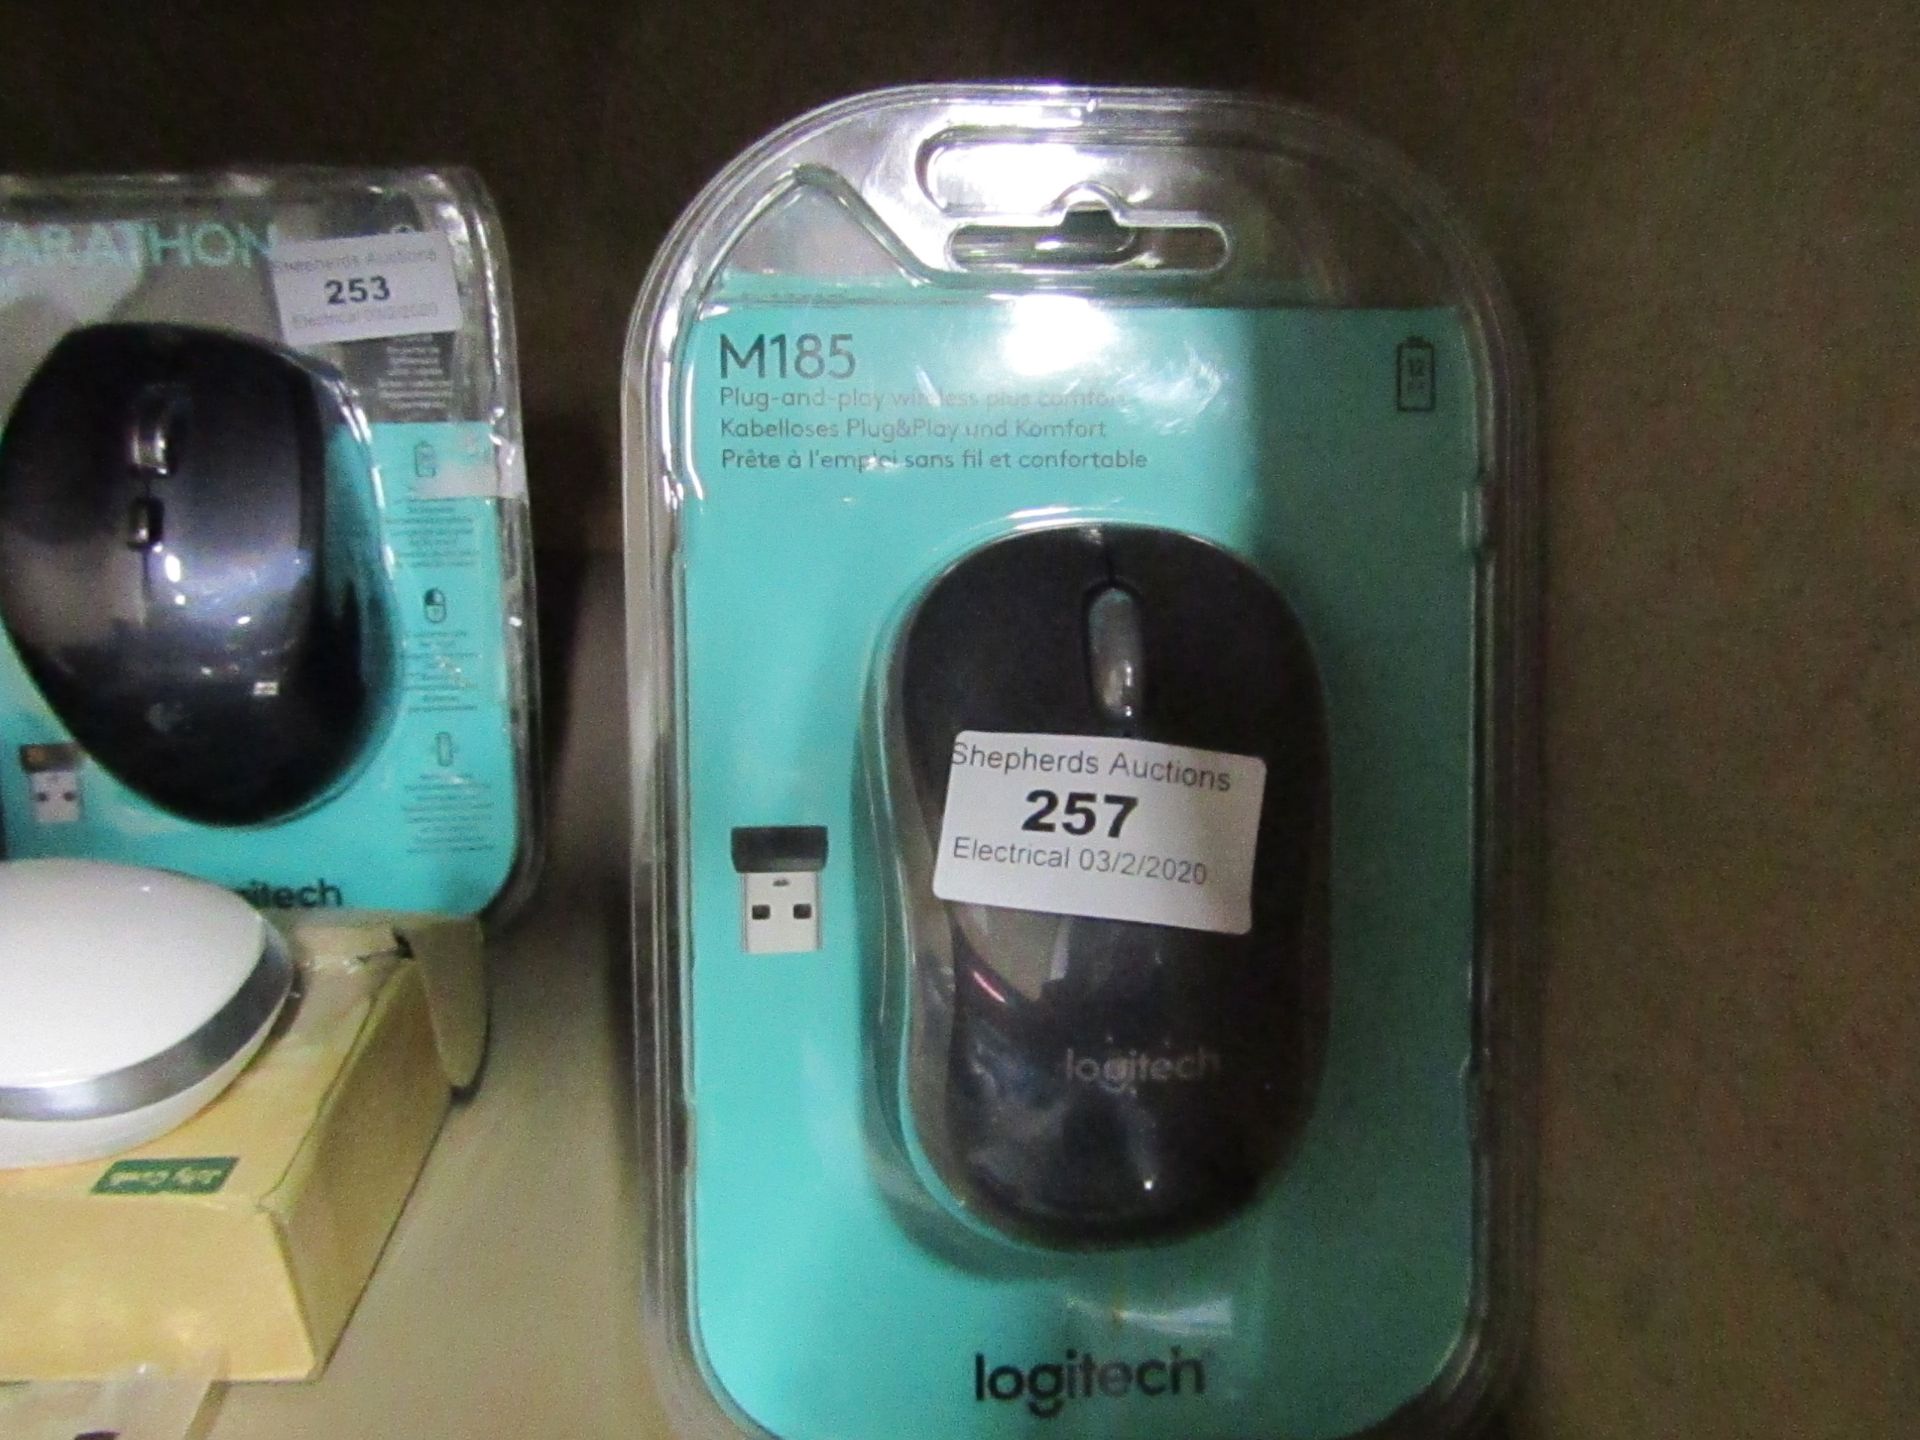 Logitech - M185 Mouse - Untested and packaged.